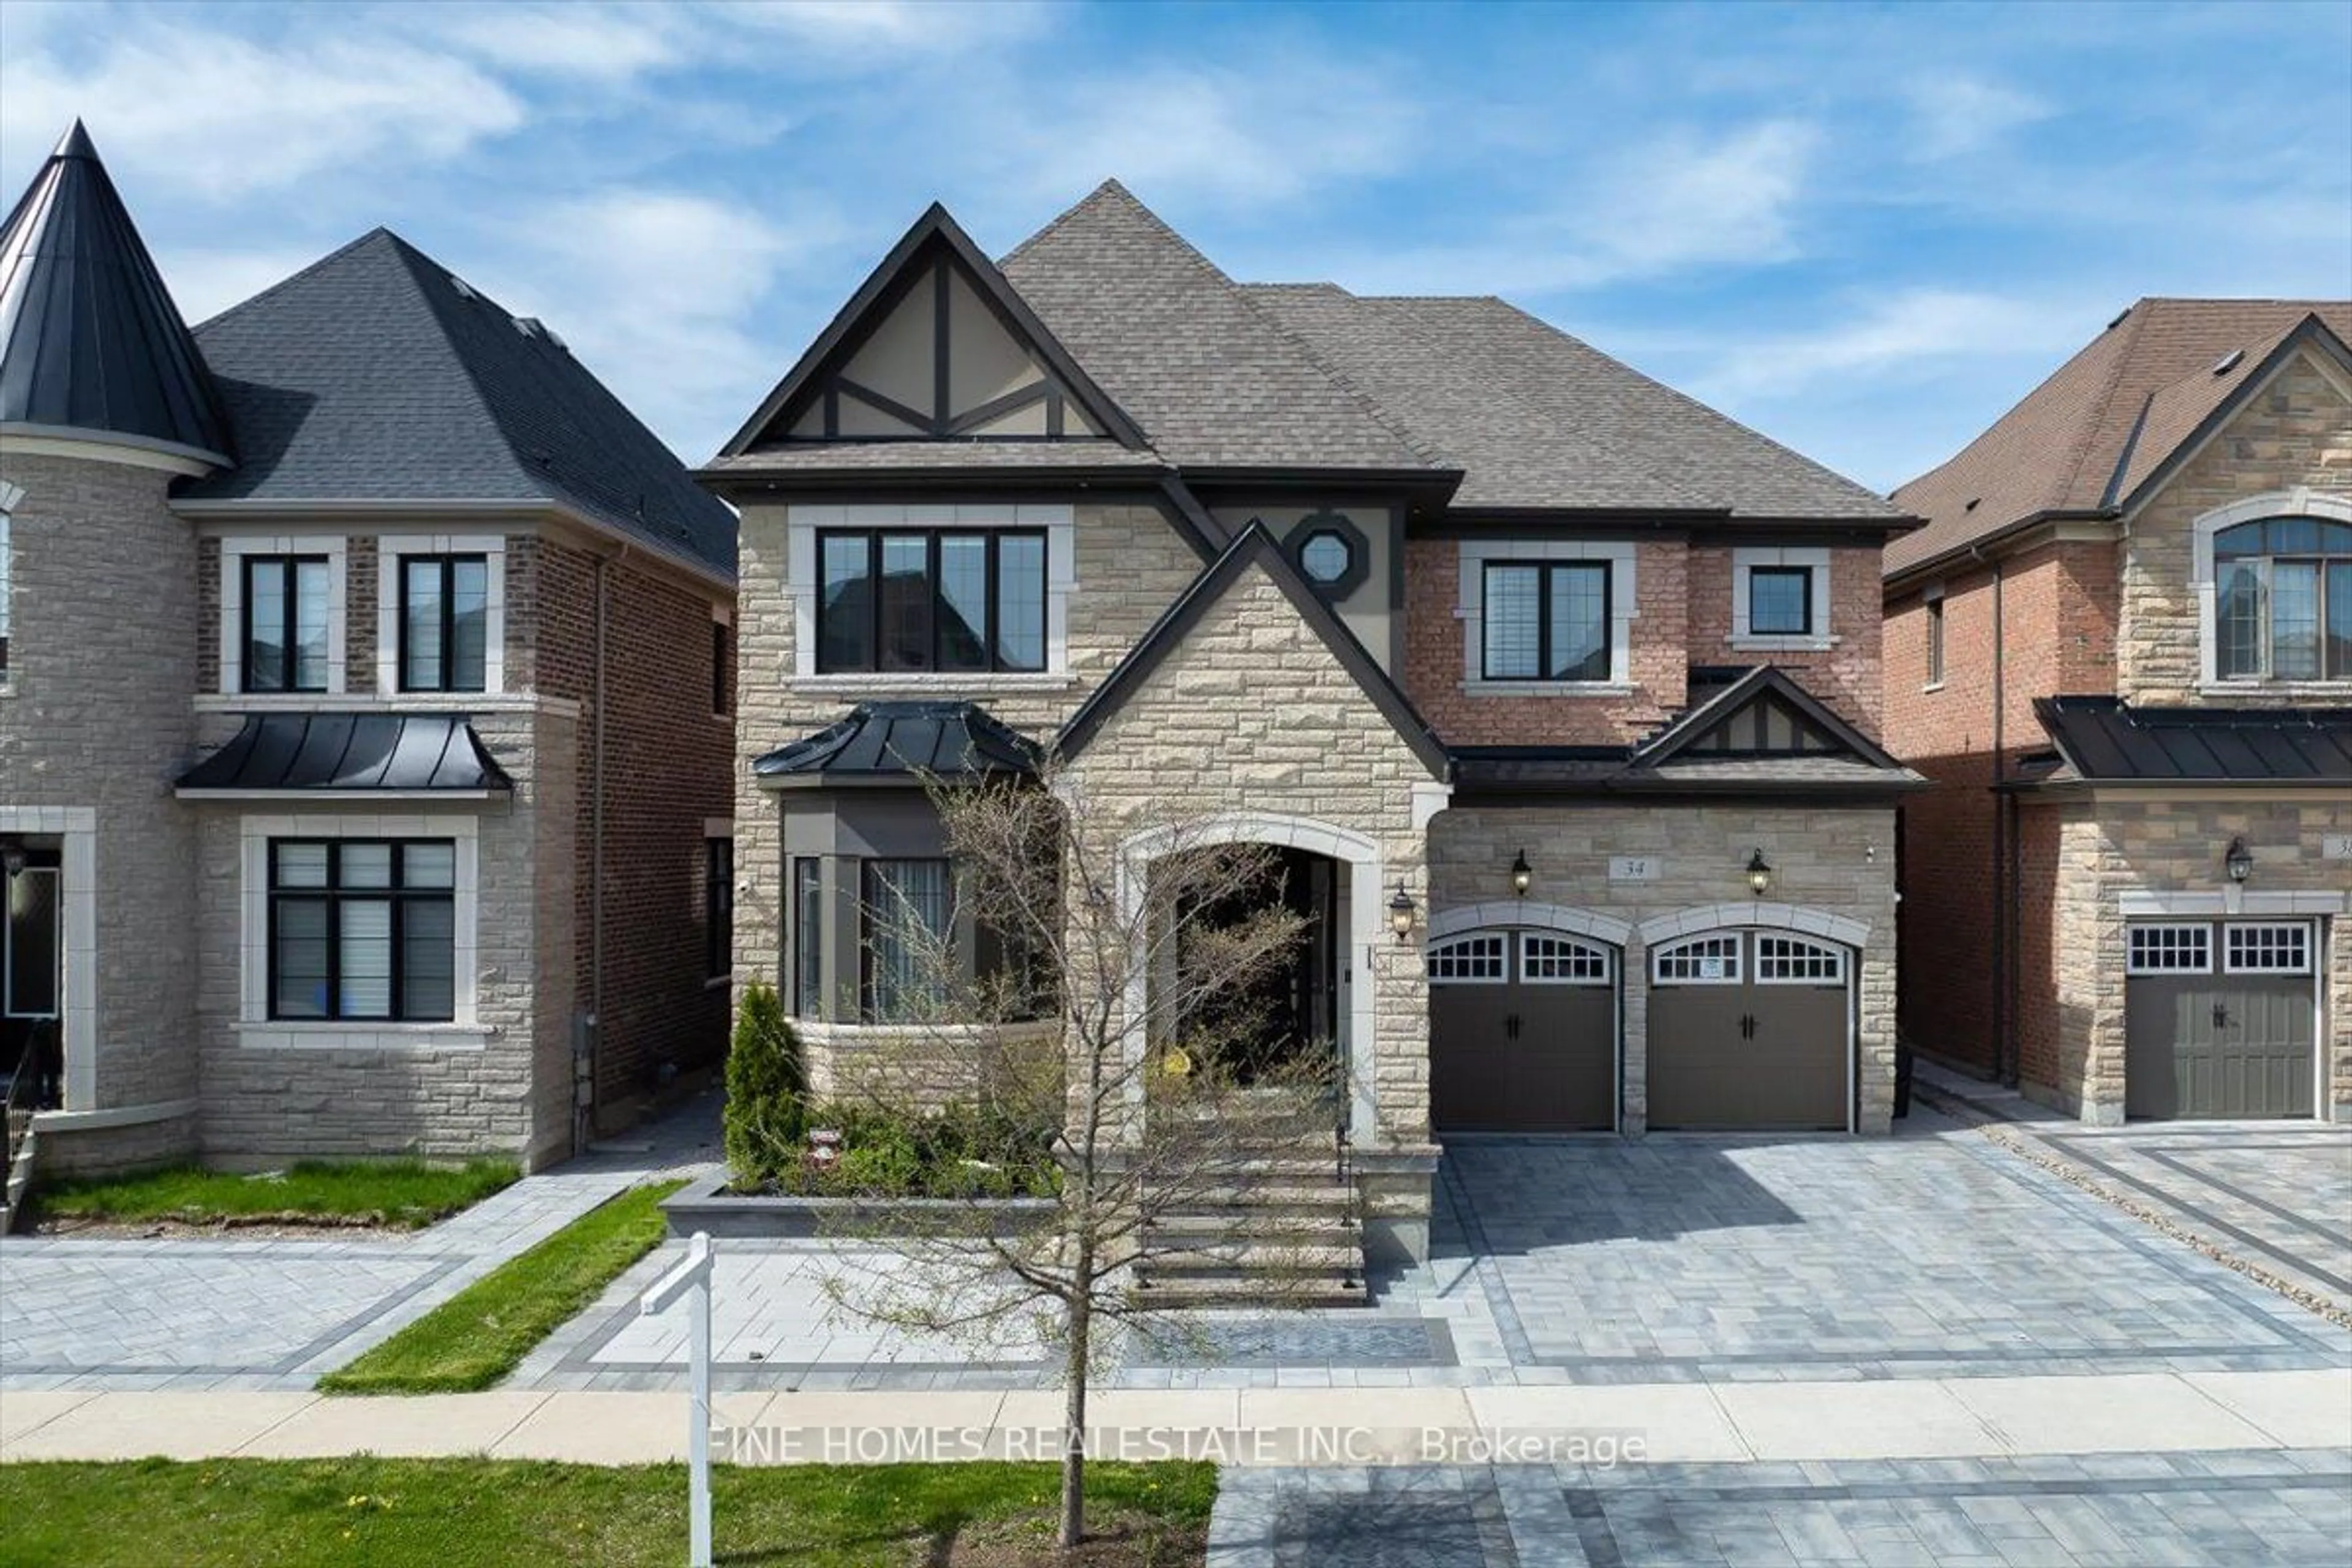 Home with brick exterior material for 34 Streamside St, Vaughan Ontario L4H 4V3